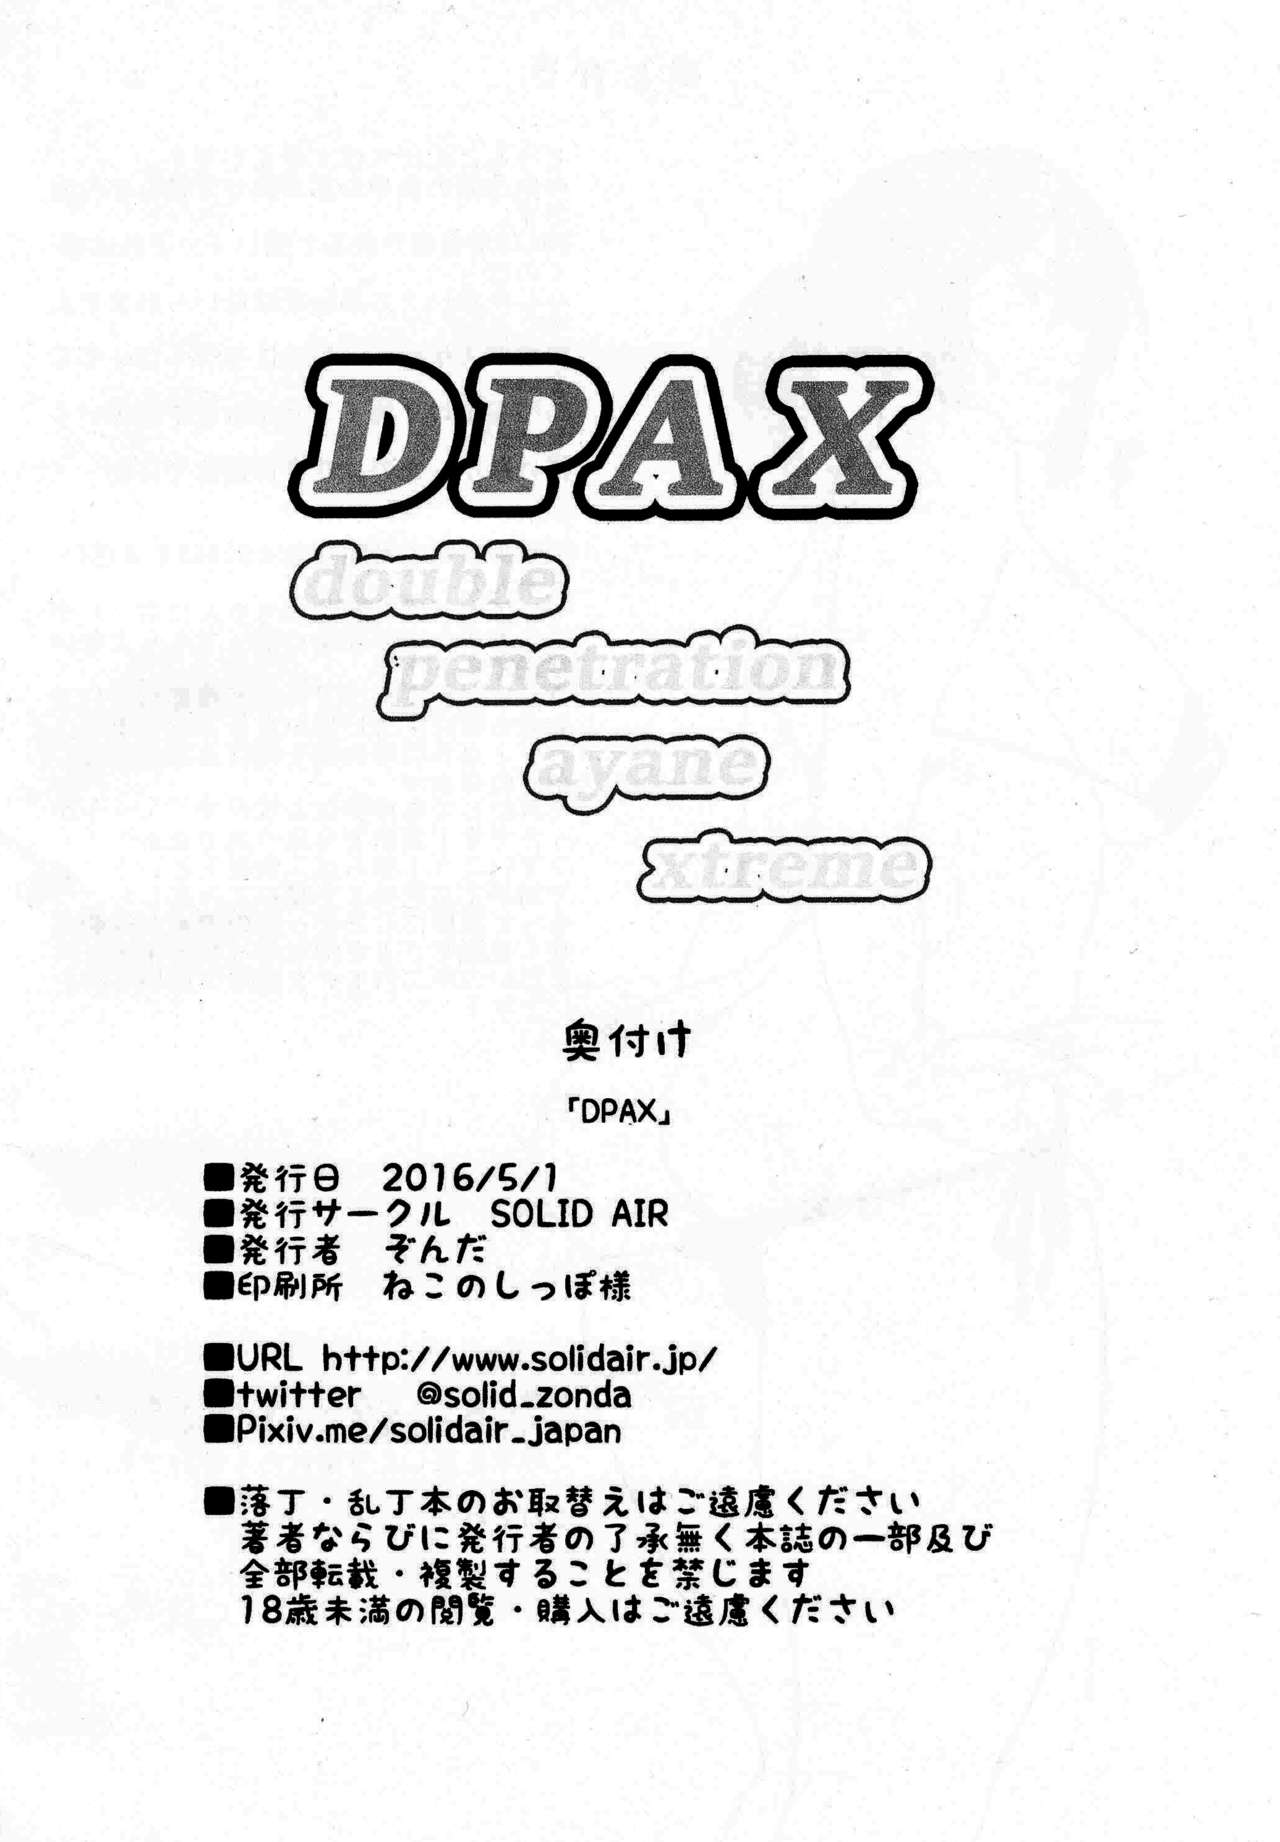 (COMIC1☆10) [SOLID AIR (Zonda)] DPAX (Dead or Alive) (COMIC1☆10) [SOLID AIR (ぞんだ)] DPAX (デッド・オア・アライブ)